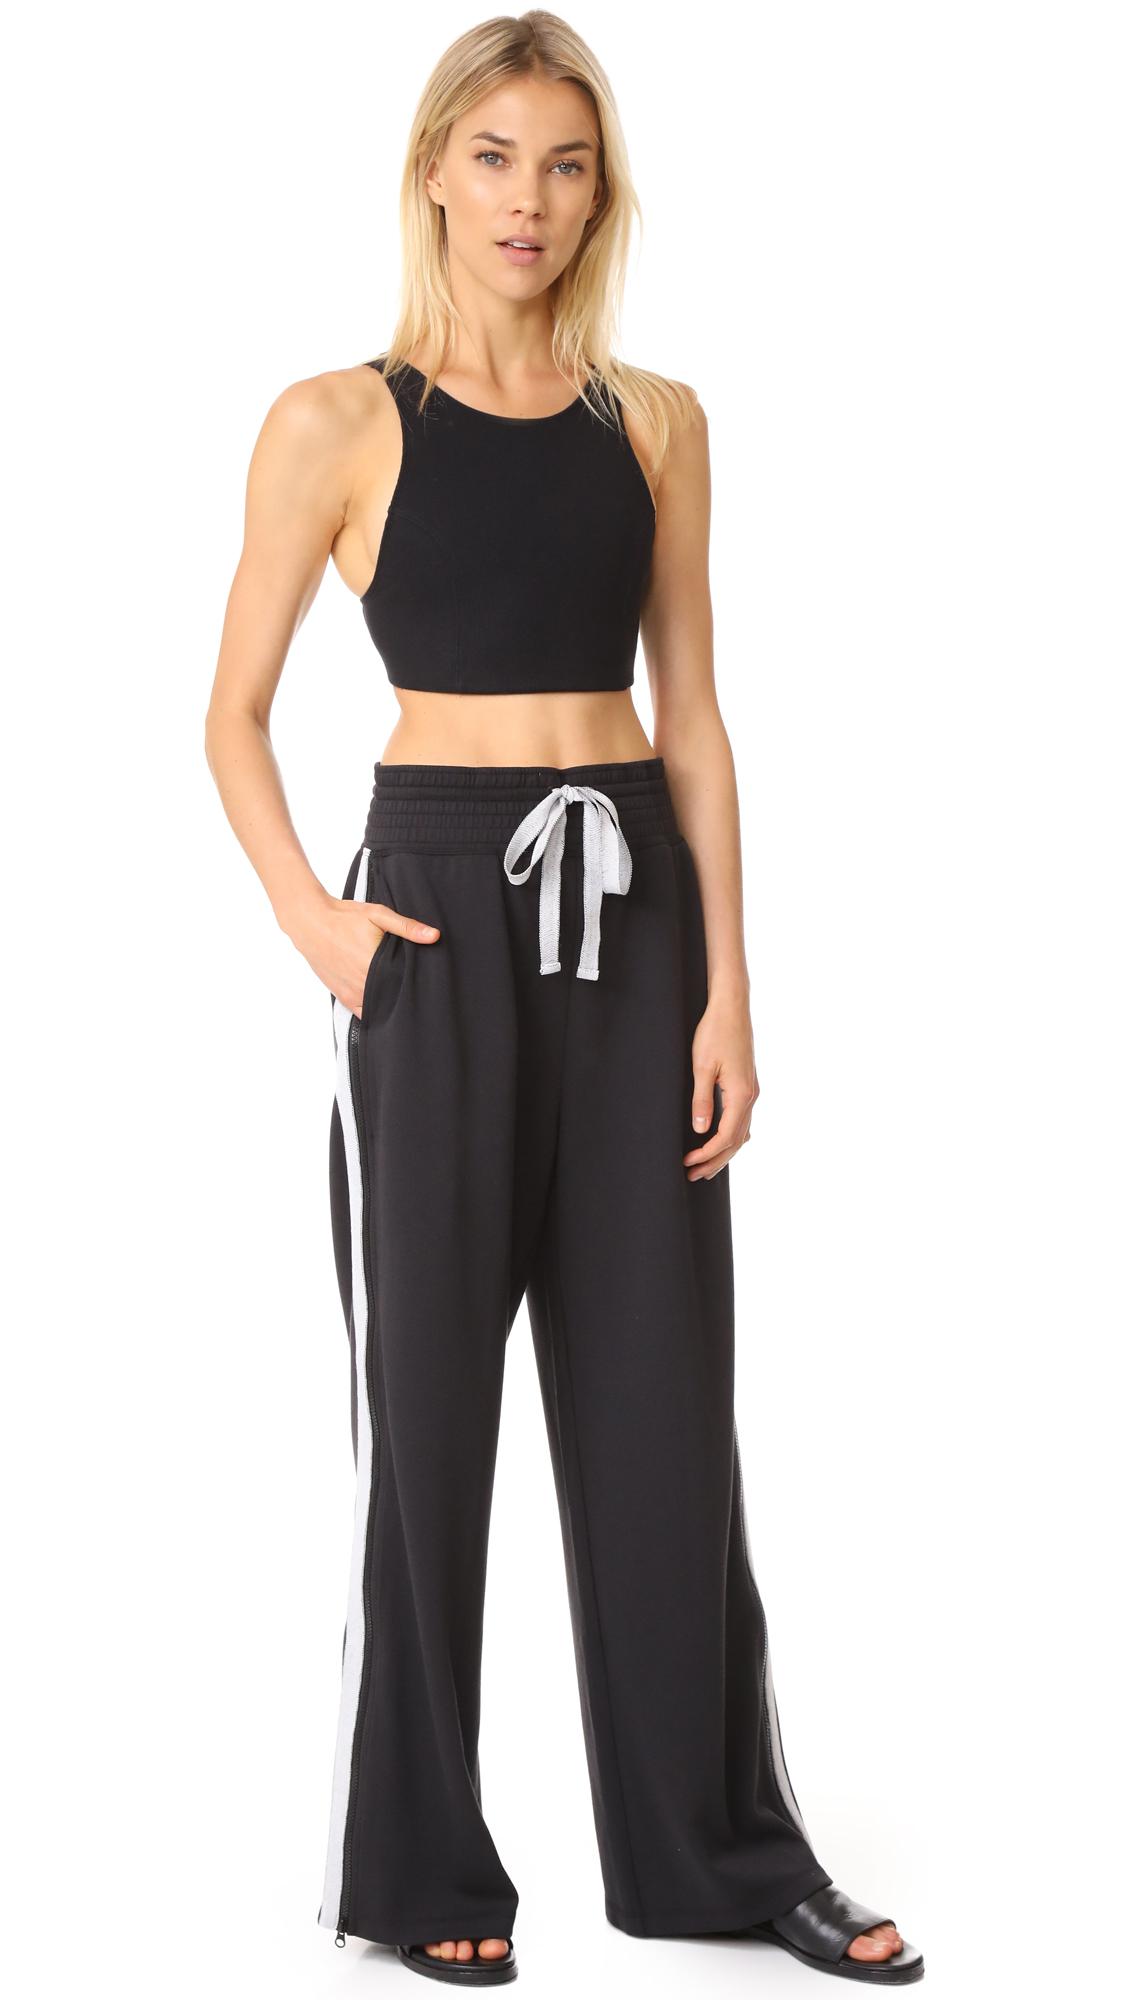 Lyst - Free People Movement Shade Flare Sweatpants in Black